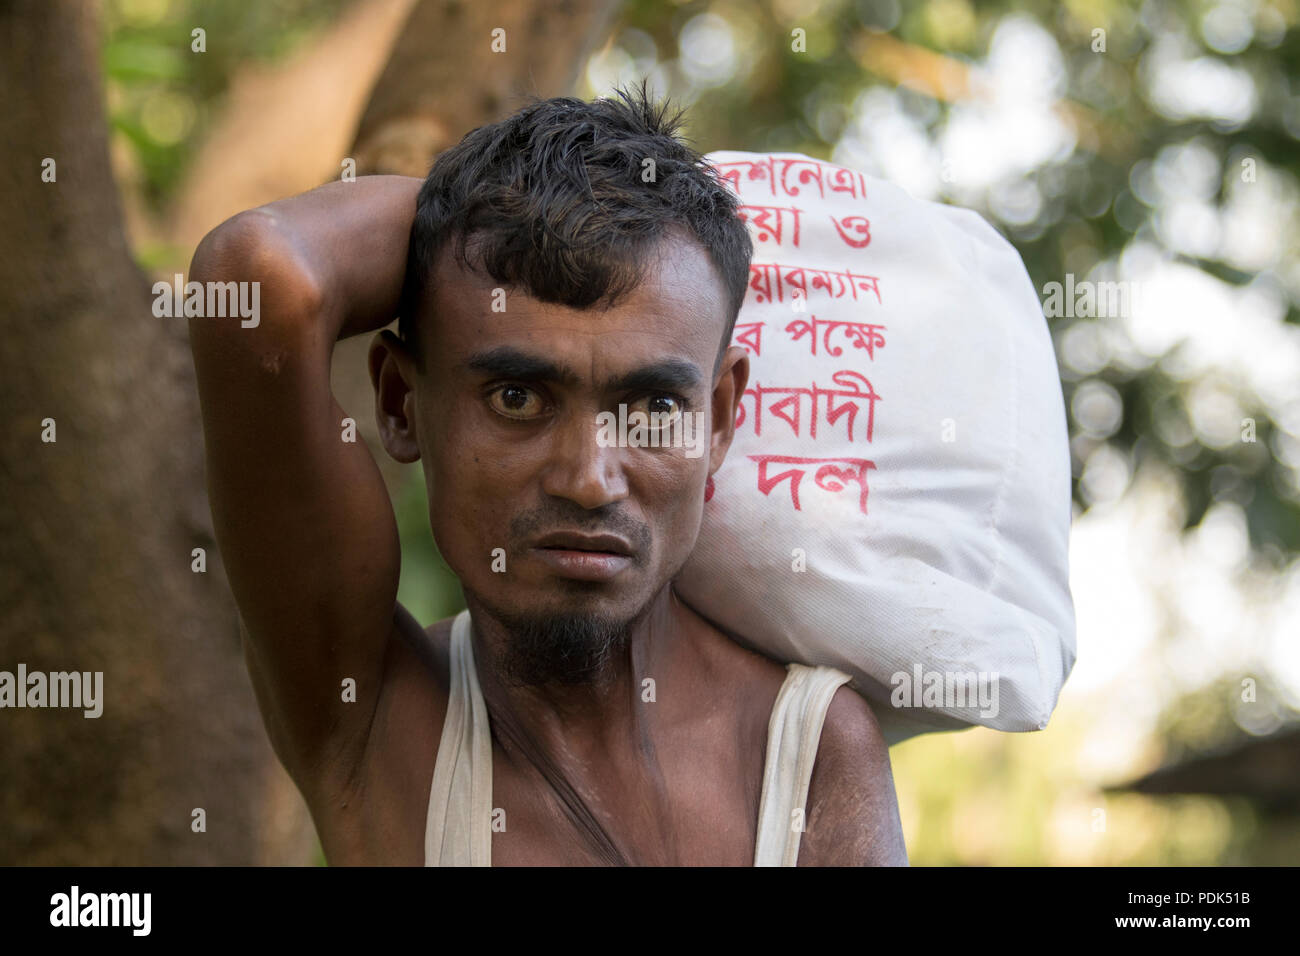 A Rohingya refugee returning to camp with relief materials at Balukhali in Ukhia, Cox's Bazar, Bangladesh Stock Photo